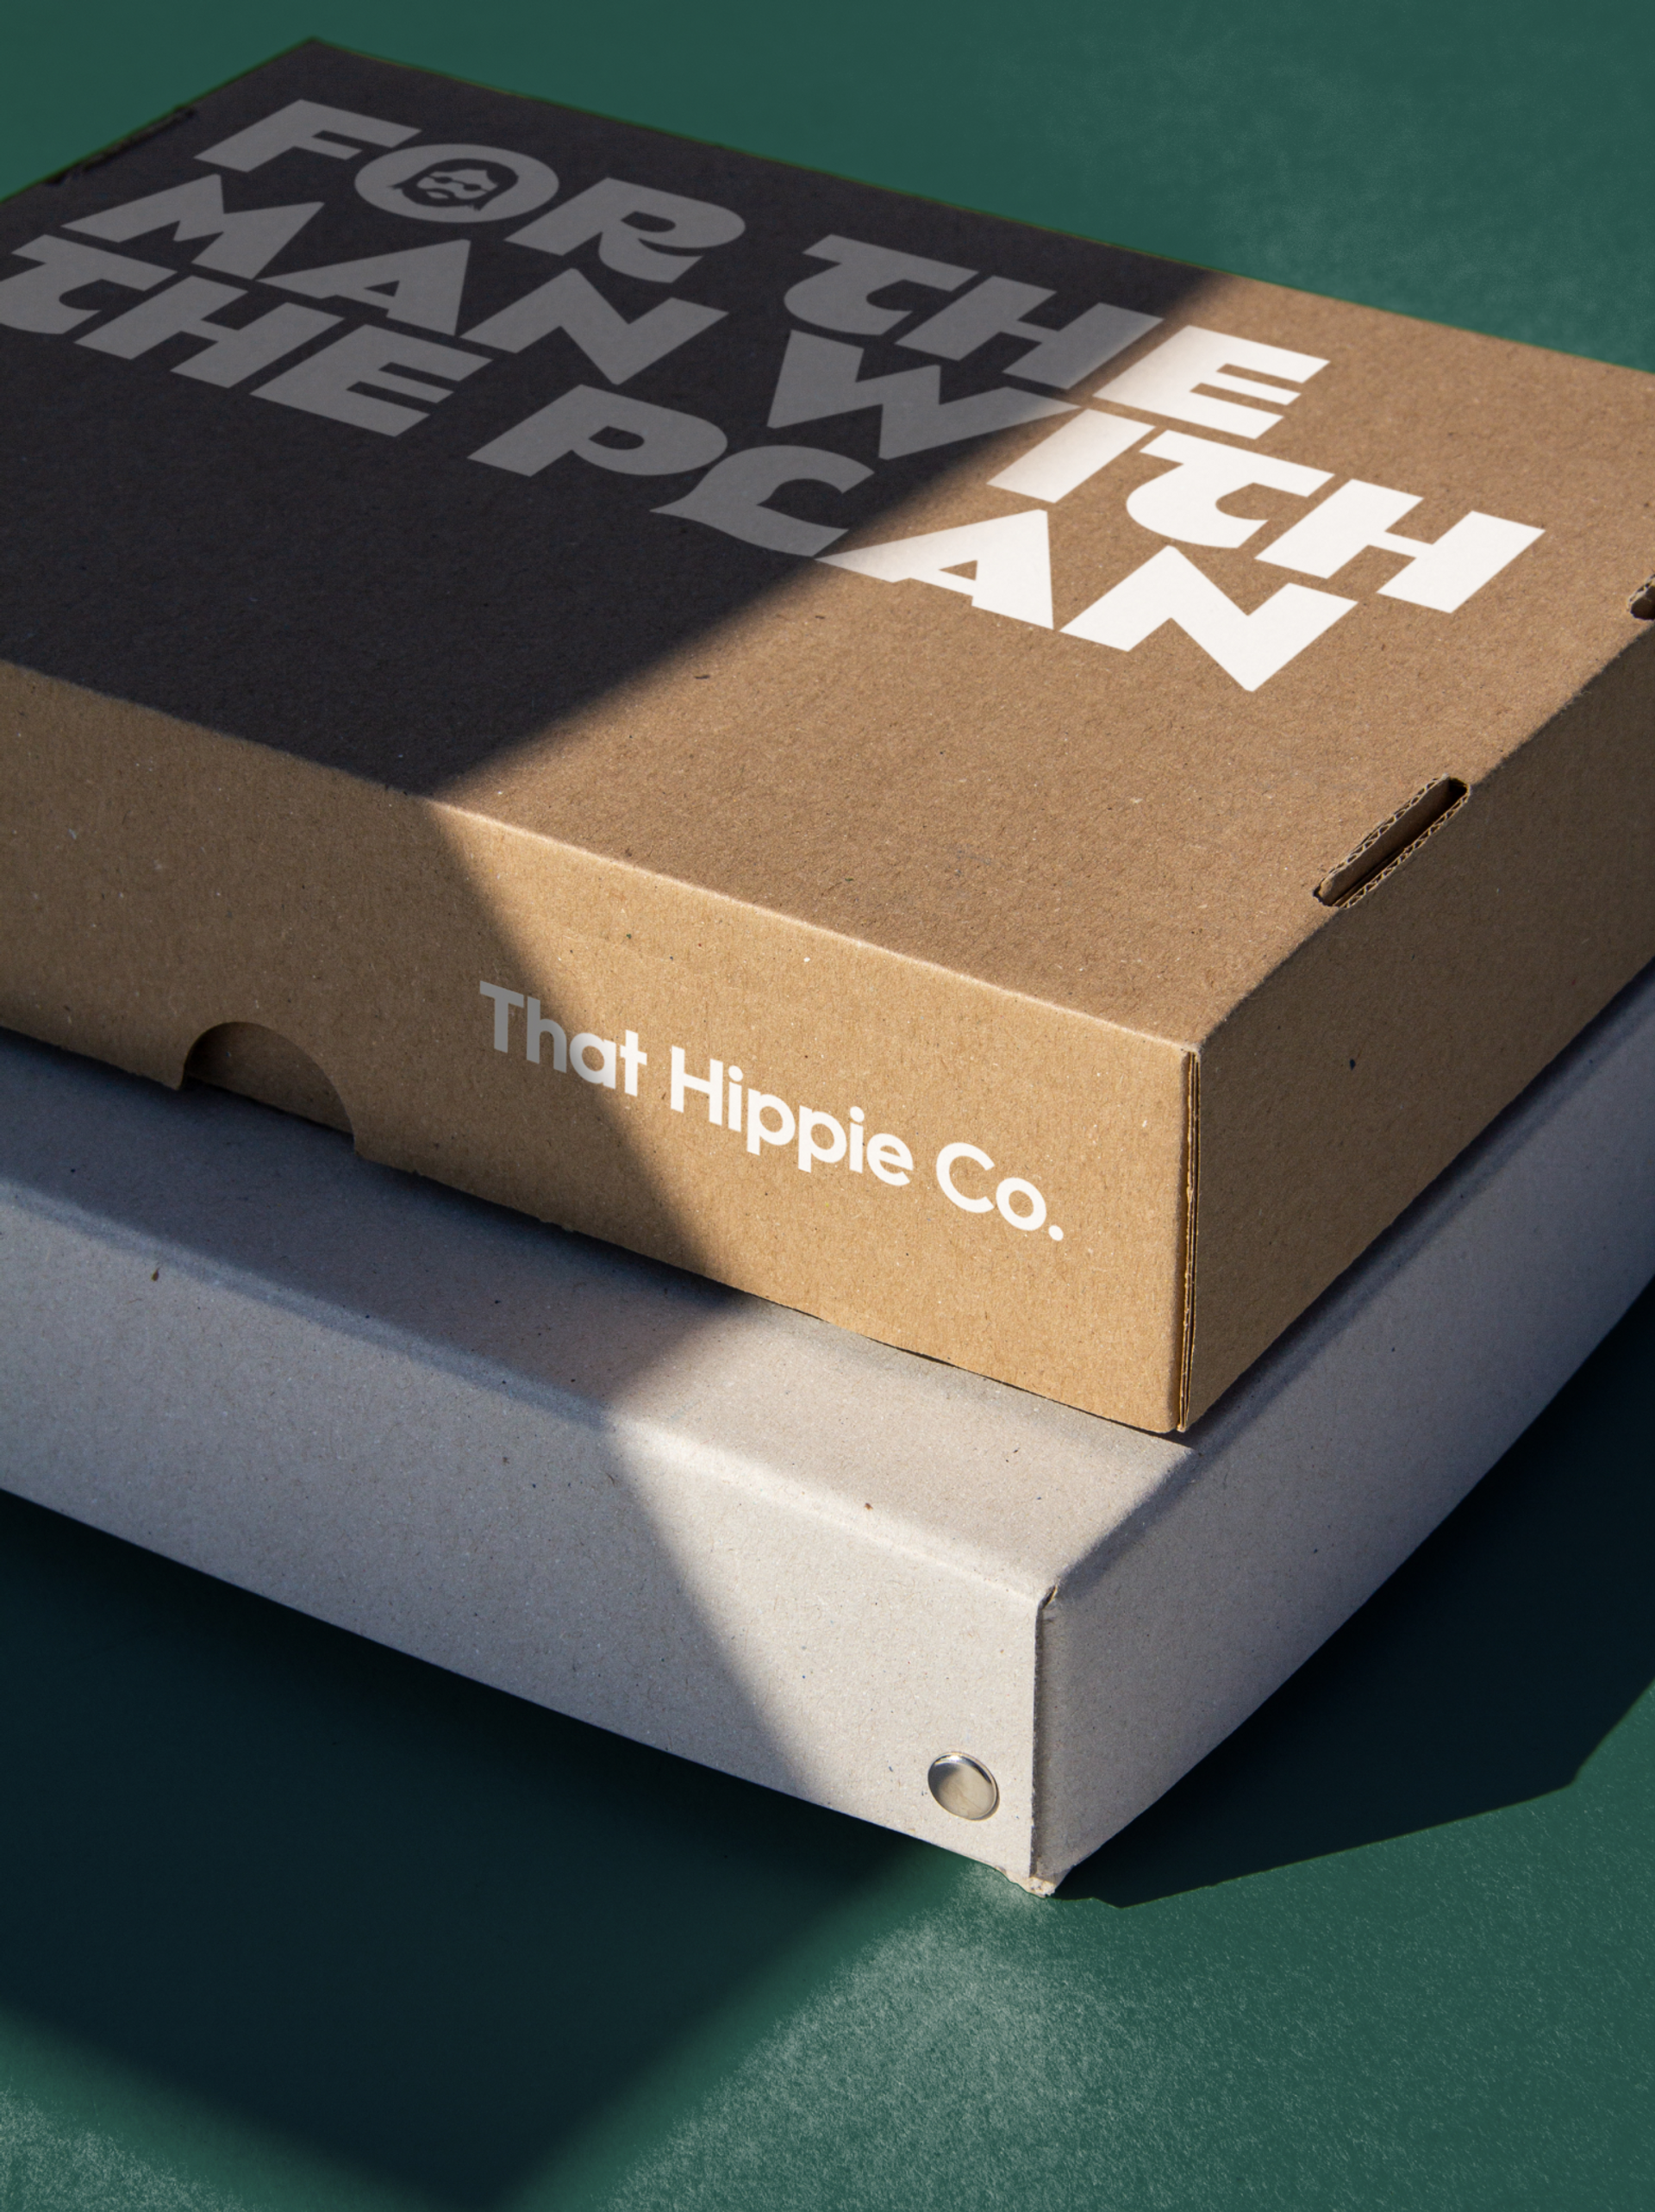 Natural sunlight shining on DTC brand delivery boxes for contemporary brand That Hippie Co. with bold typography “For the man with the plan” branding by Our Revolution